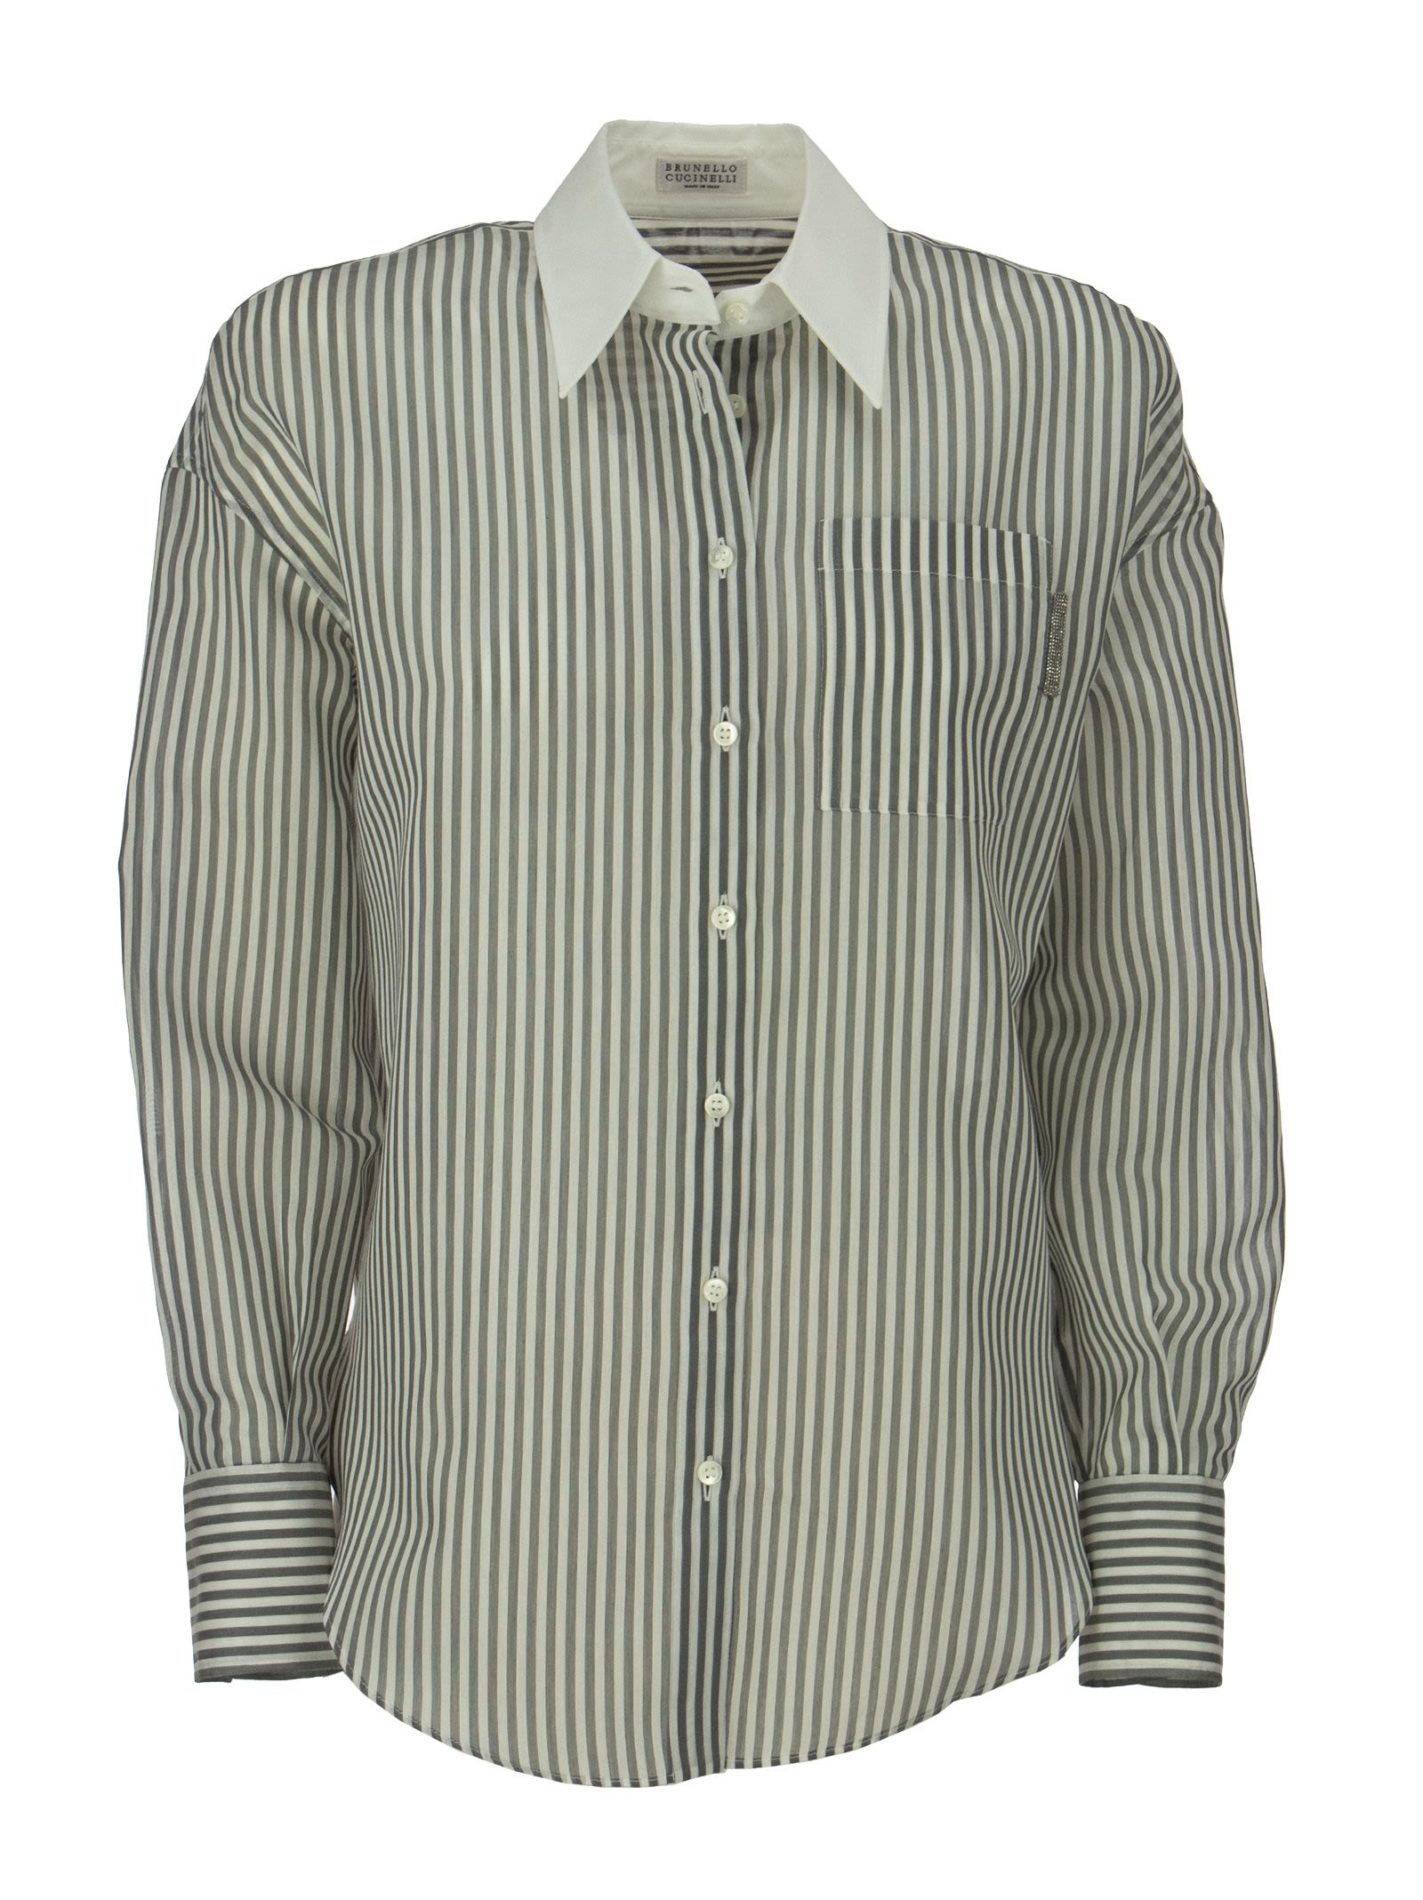 Cotton and Silk Striped Gauze Shirt with Poplin Collar and Shiny Tab ...